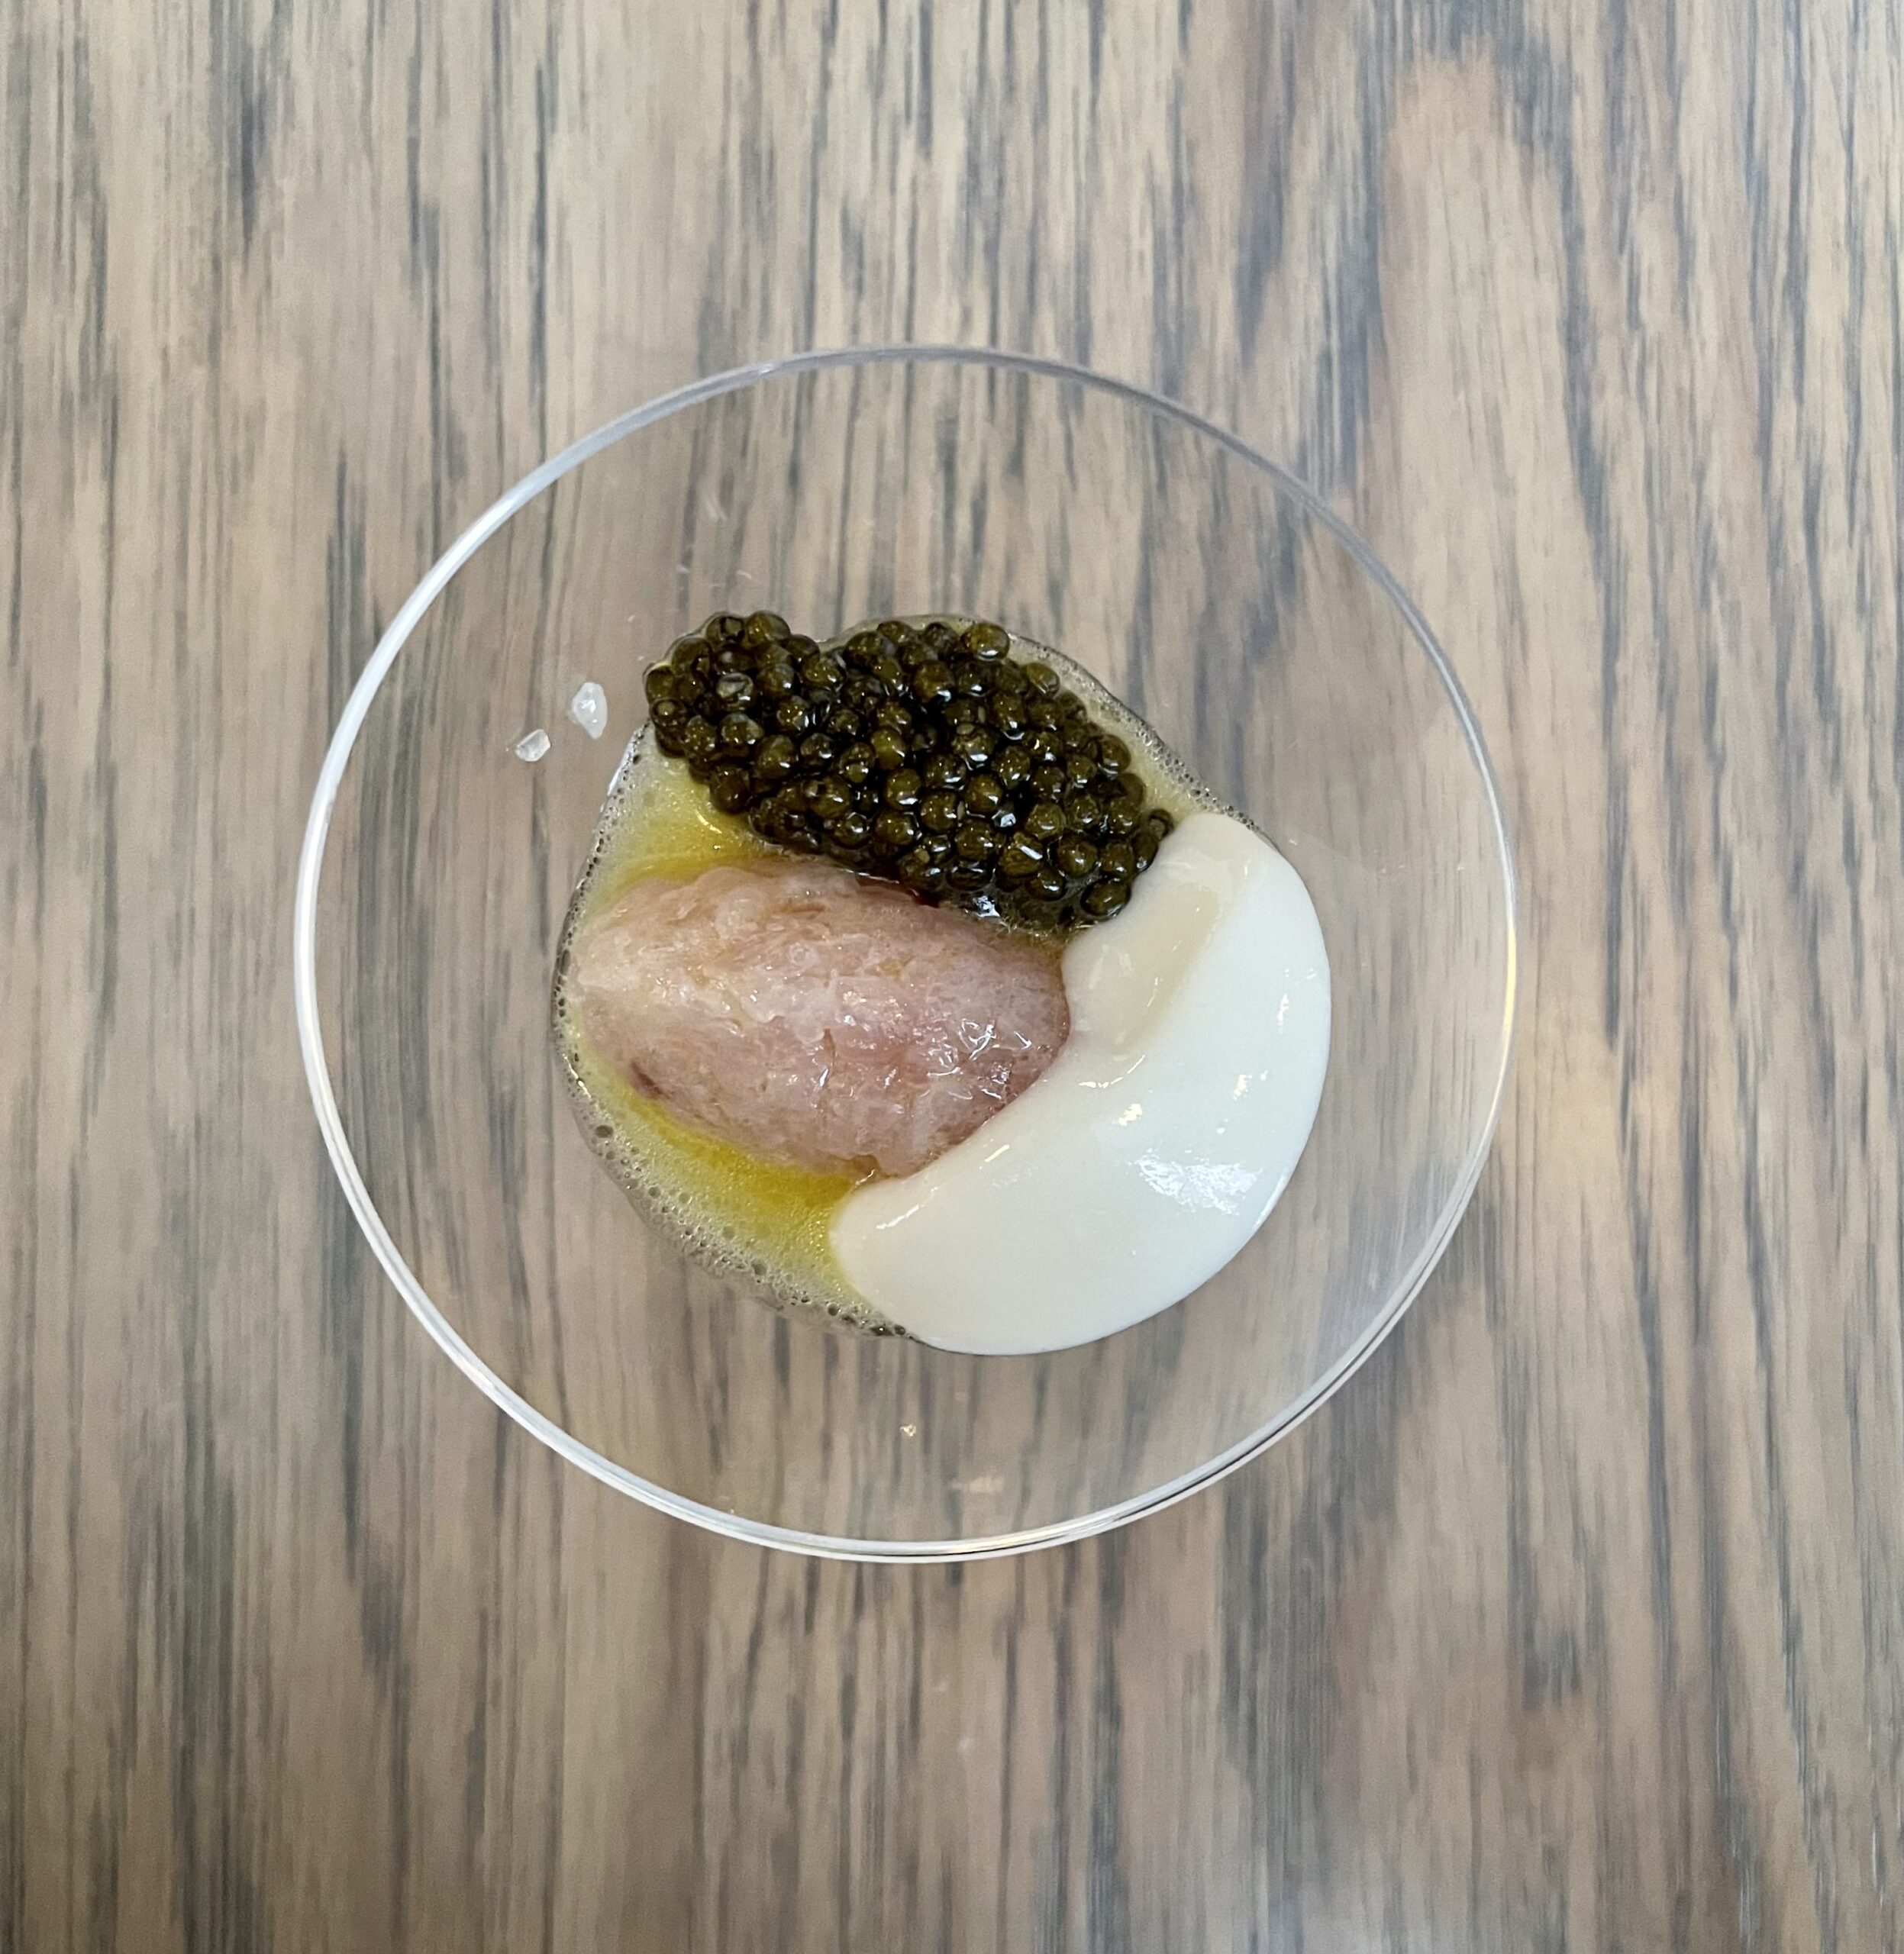 Hamachi with golden kaluga caviar and coconut from kasama.